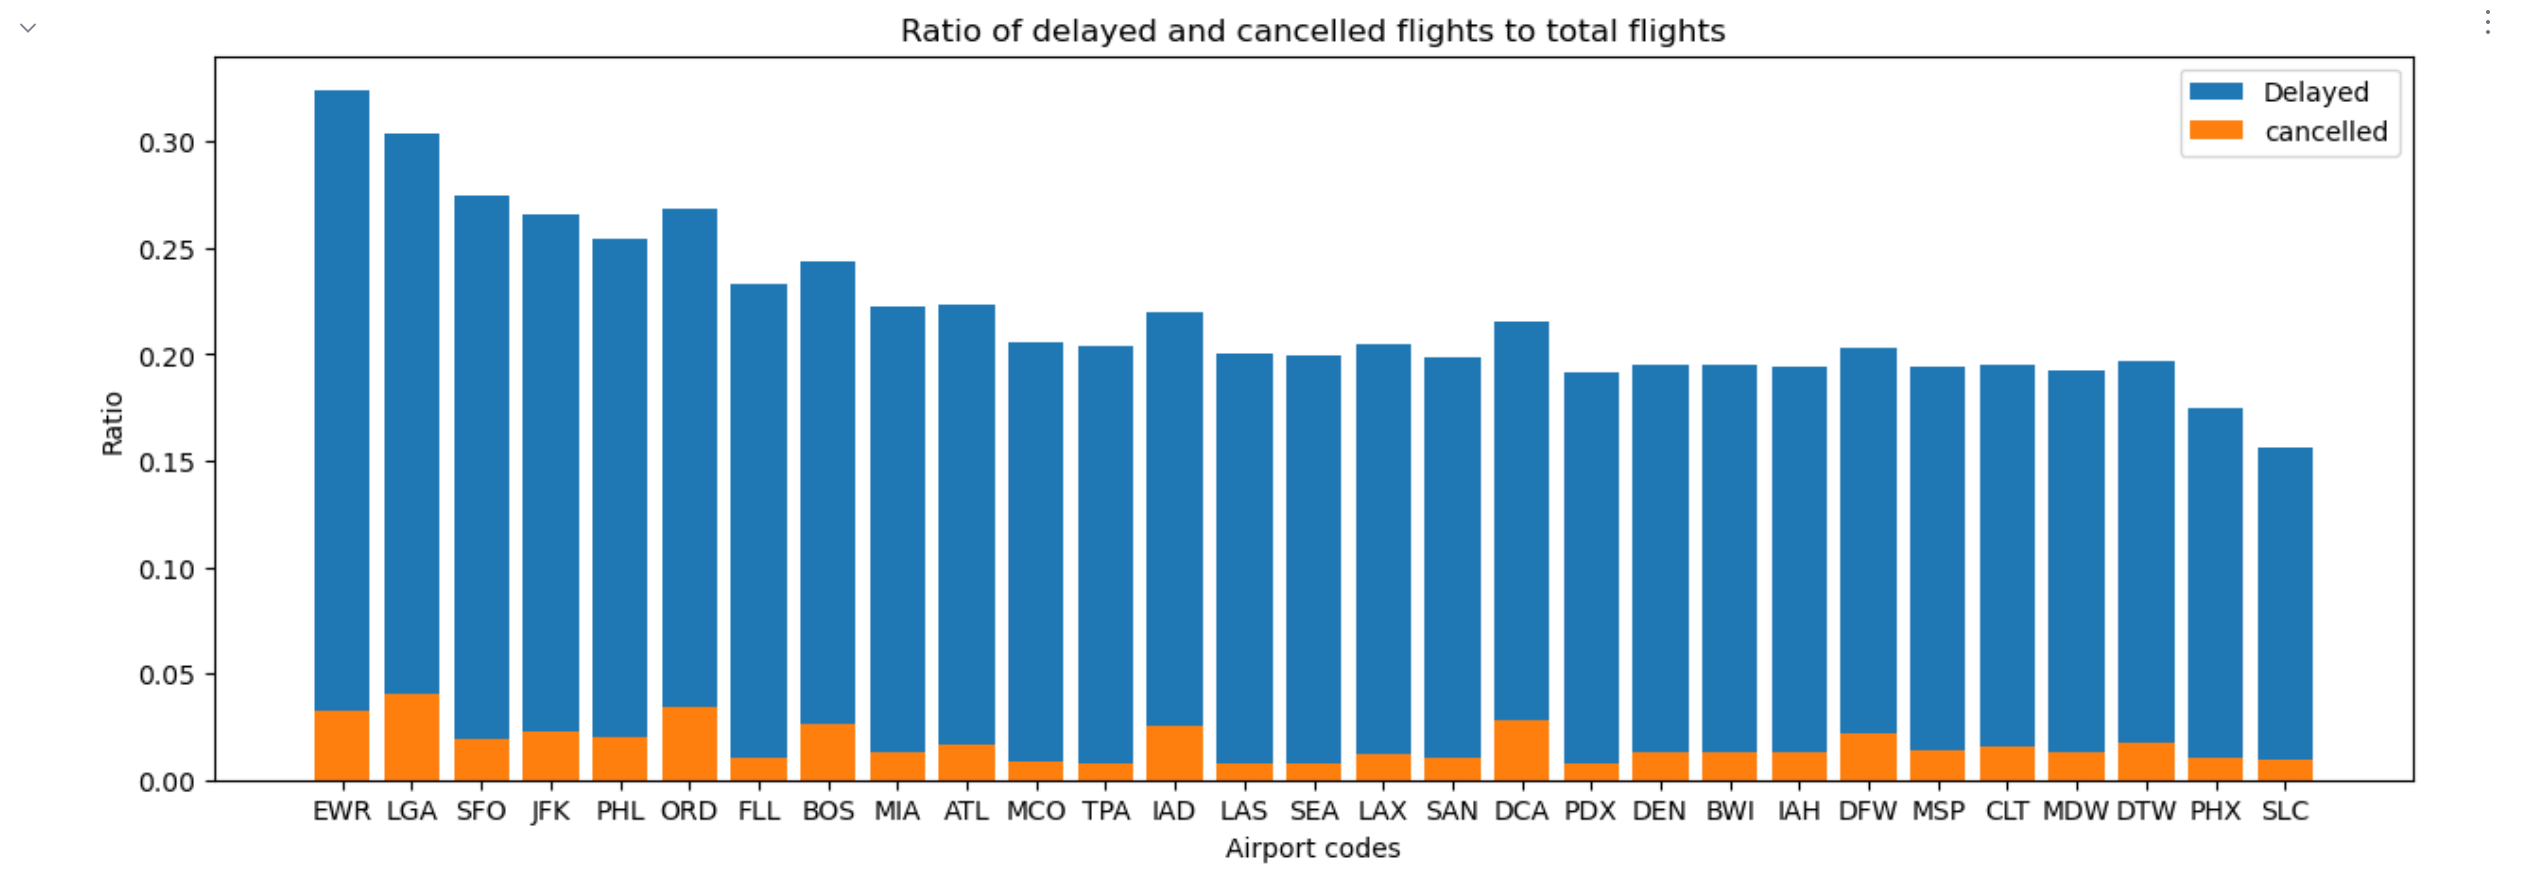 Bar chart with delays and cancellations ratios